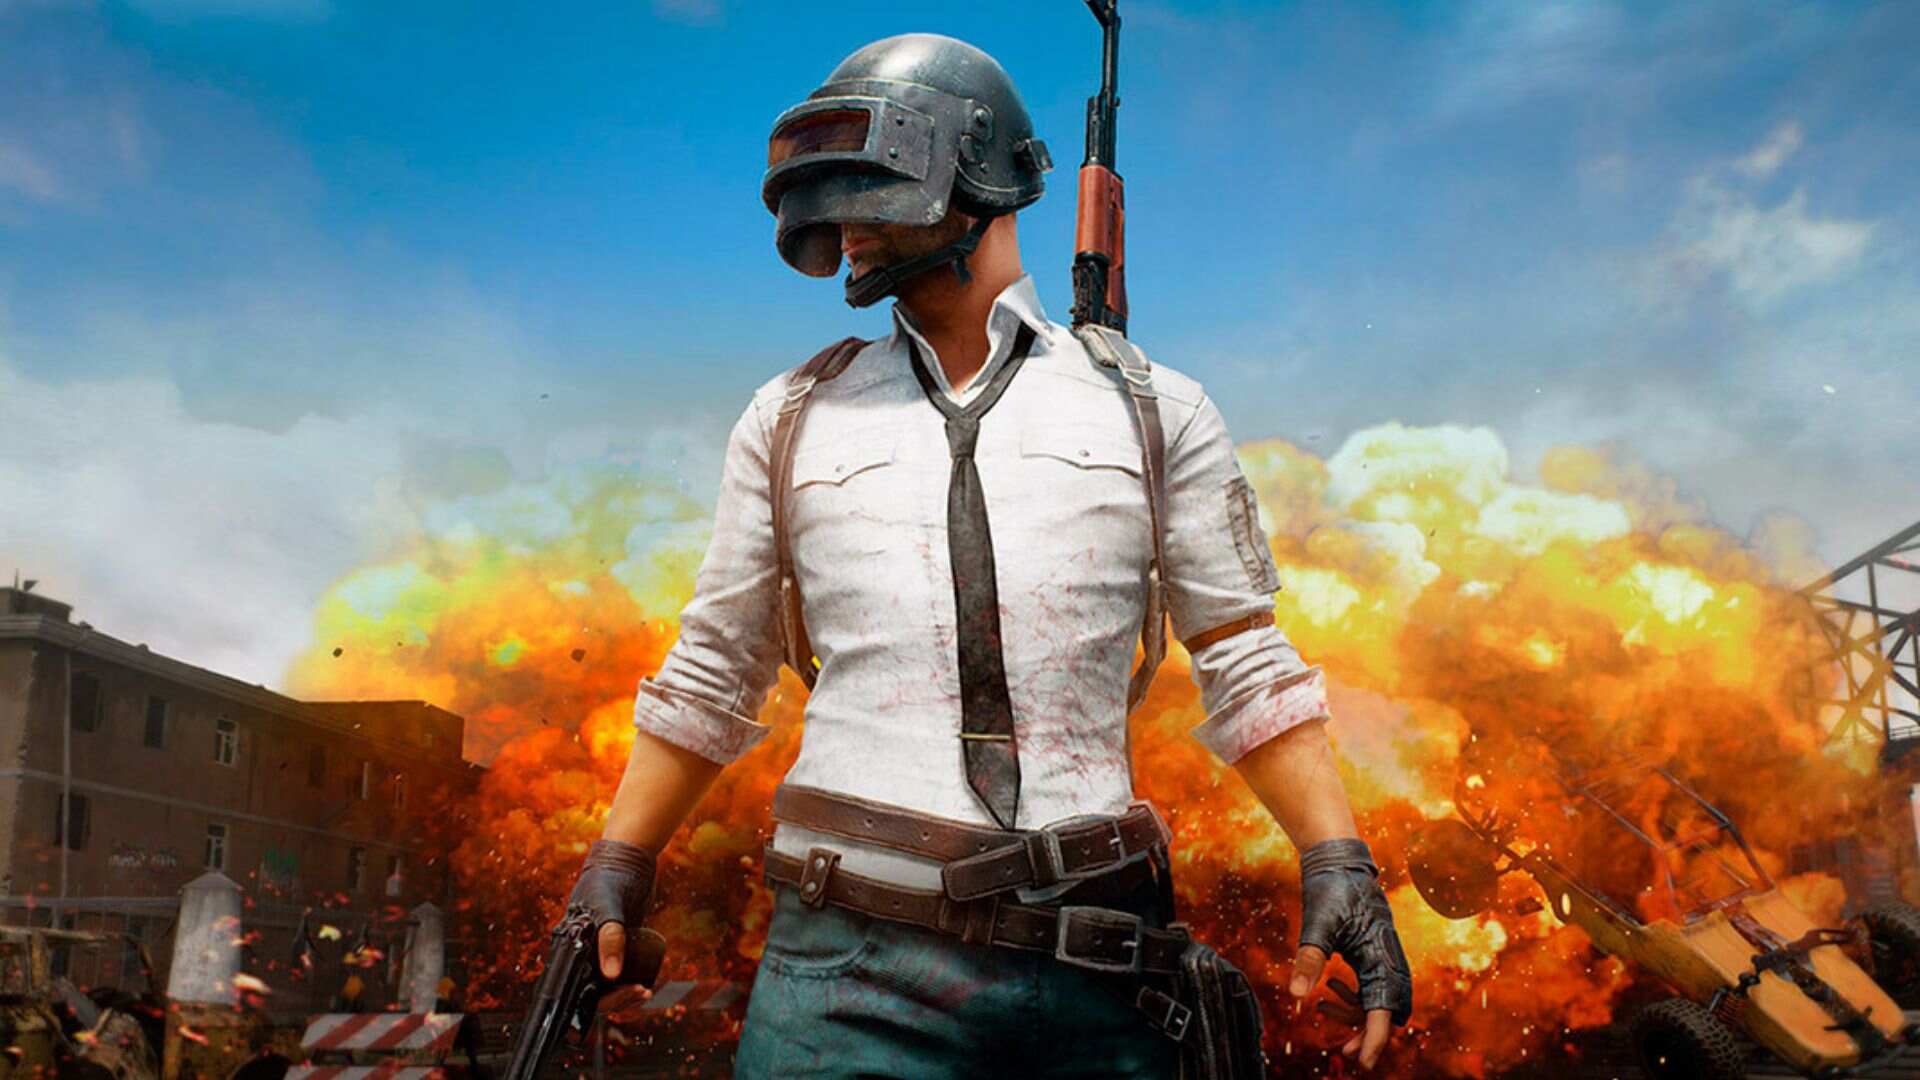 Download failed because you may not have purchased this app pubg фото 11